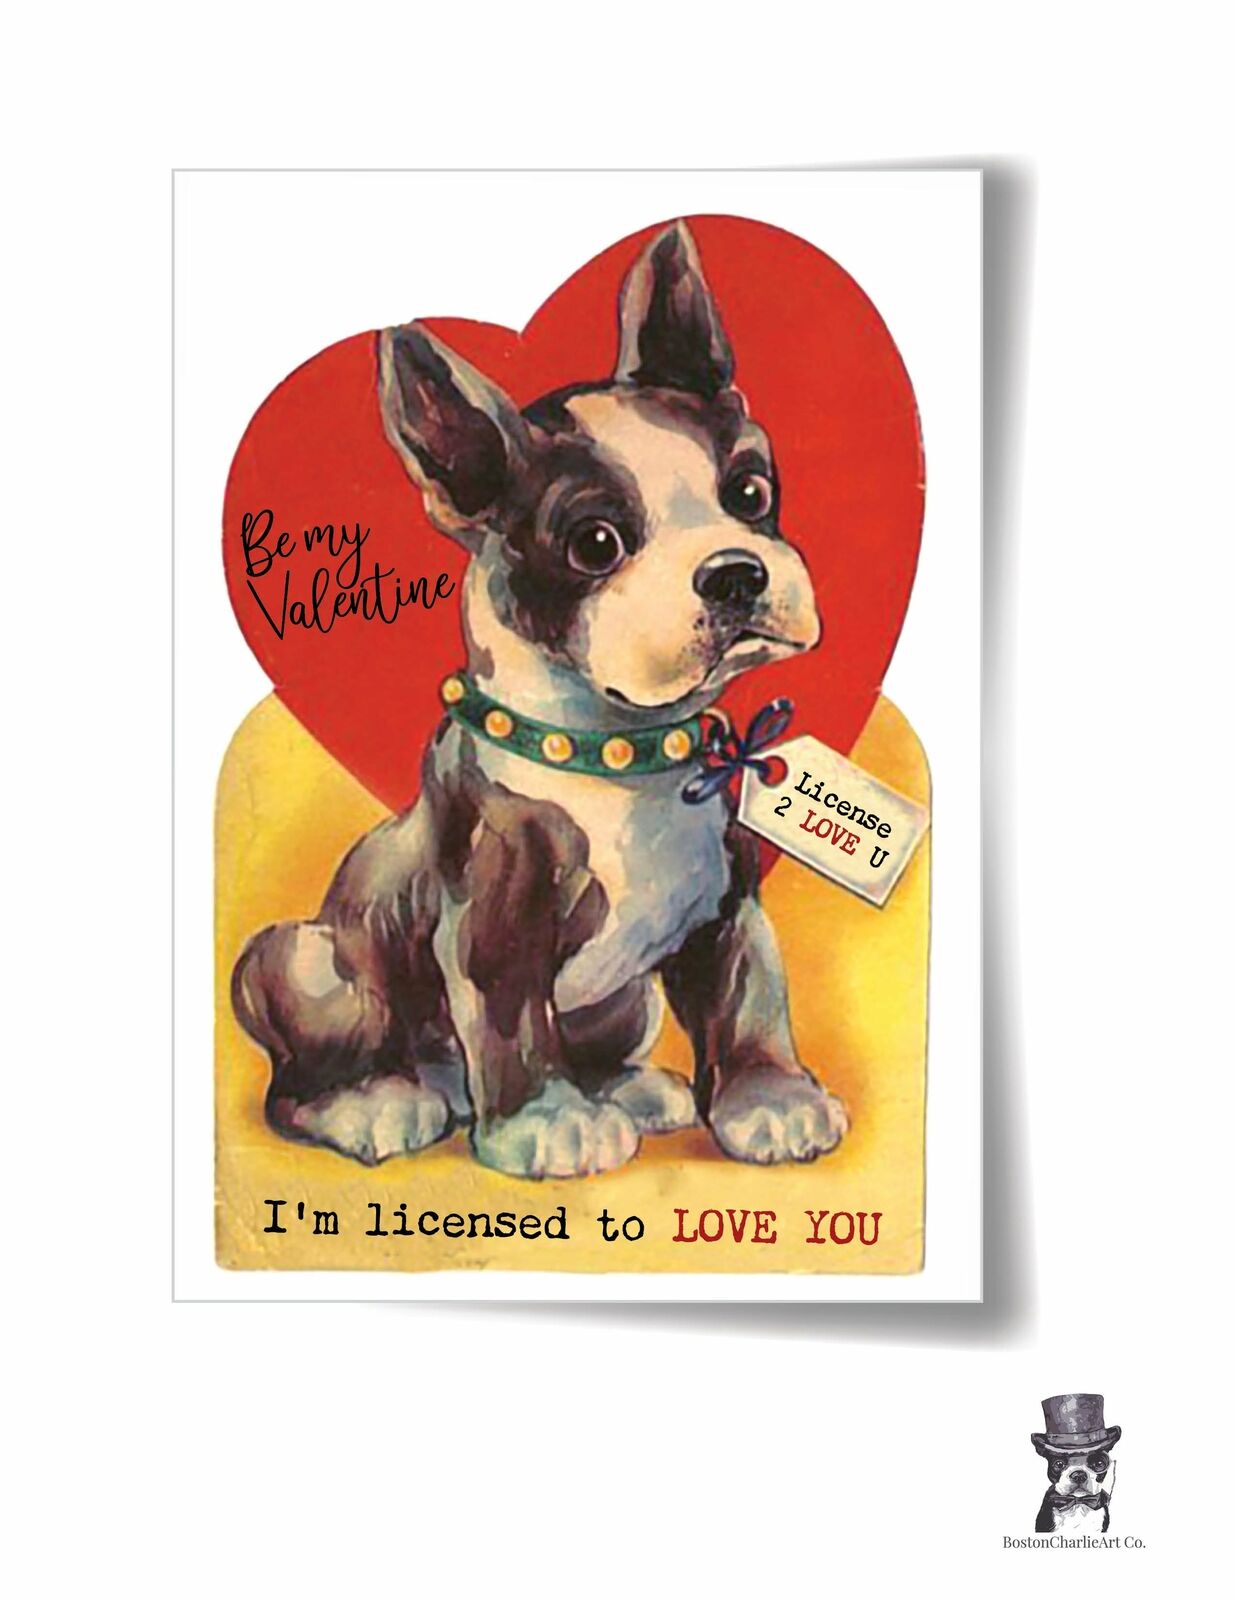 Vintage Boston Terrier Valentine Card Remakes 4 come in a pack for your love.